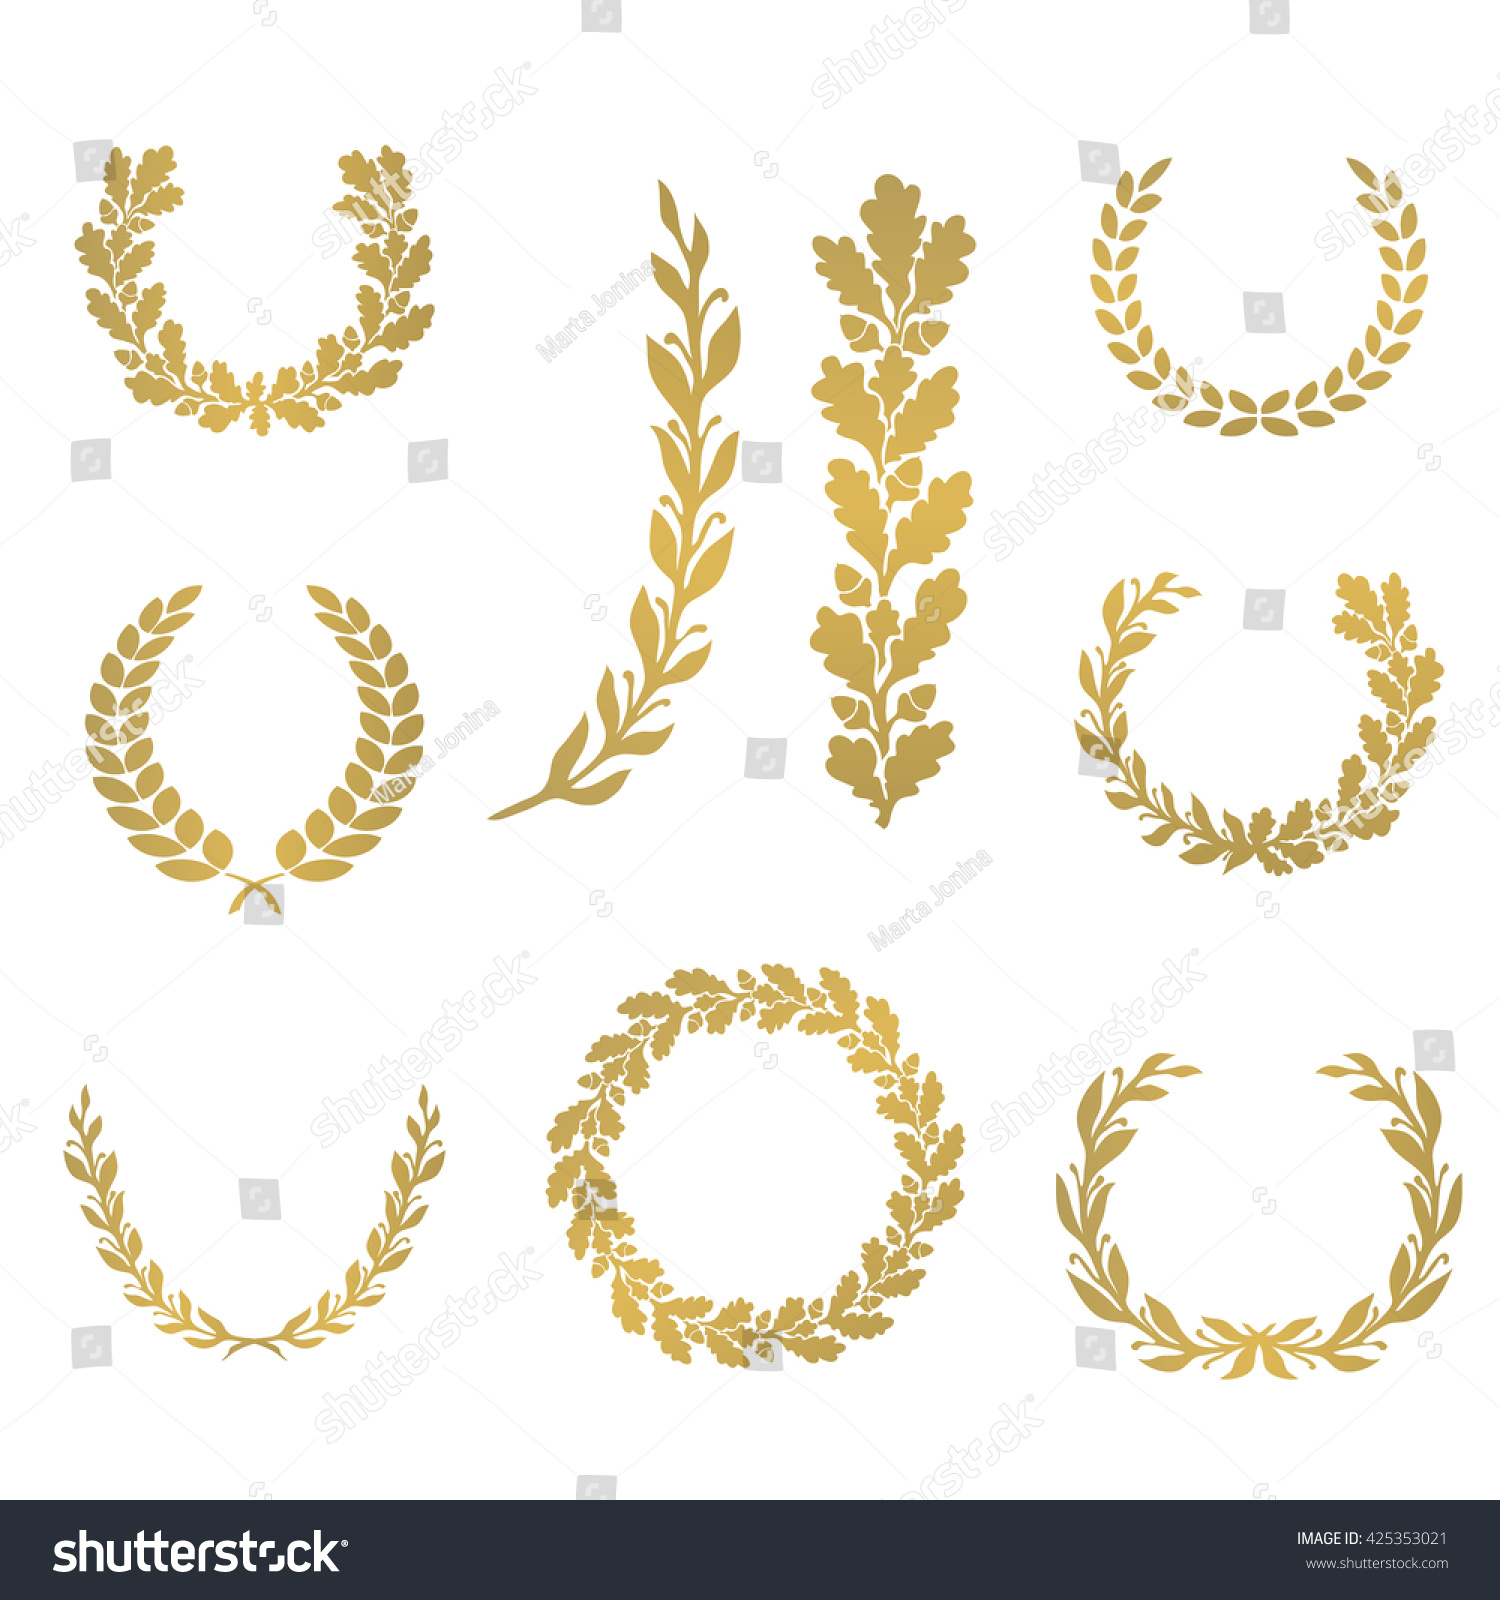 SVG of Silhouette laurel and oak wreaths in different  shapes - half circle, circle, branch svg